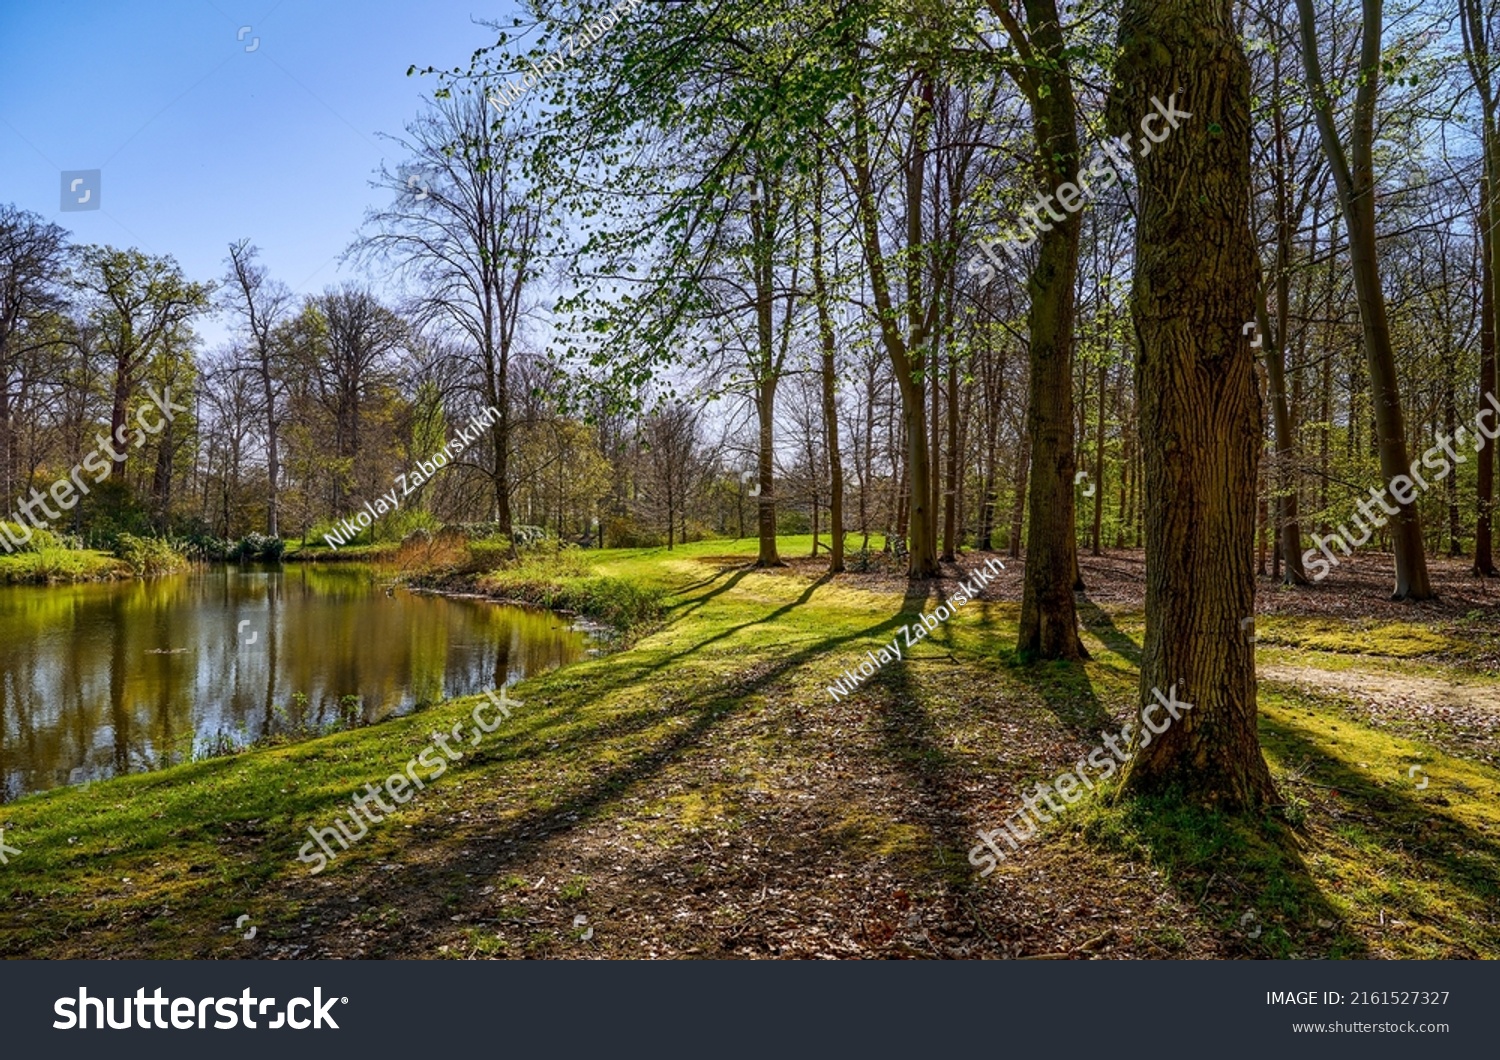 Pond in wooded park in spring. Wooded park scene #2161527327